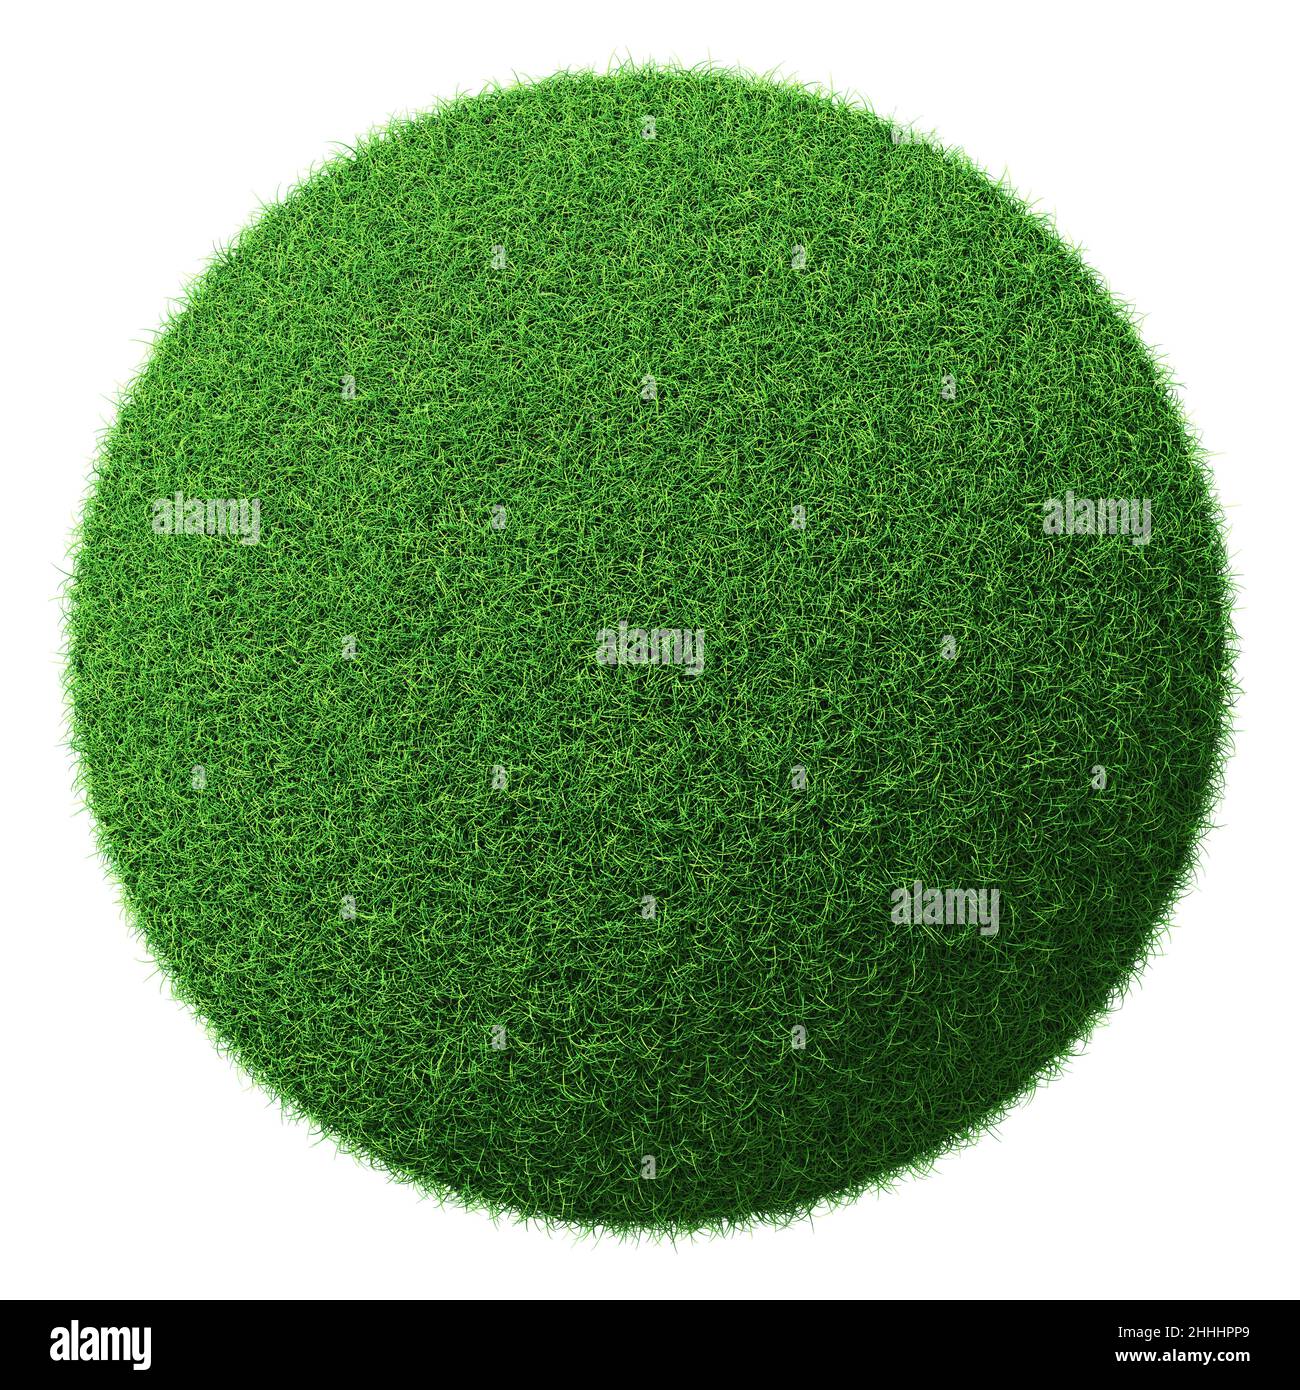 Grass shape - design element isolated - 3d rendering Stock Photo